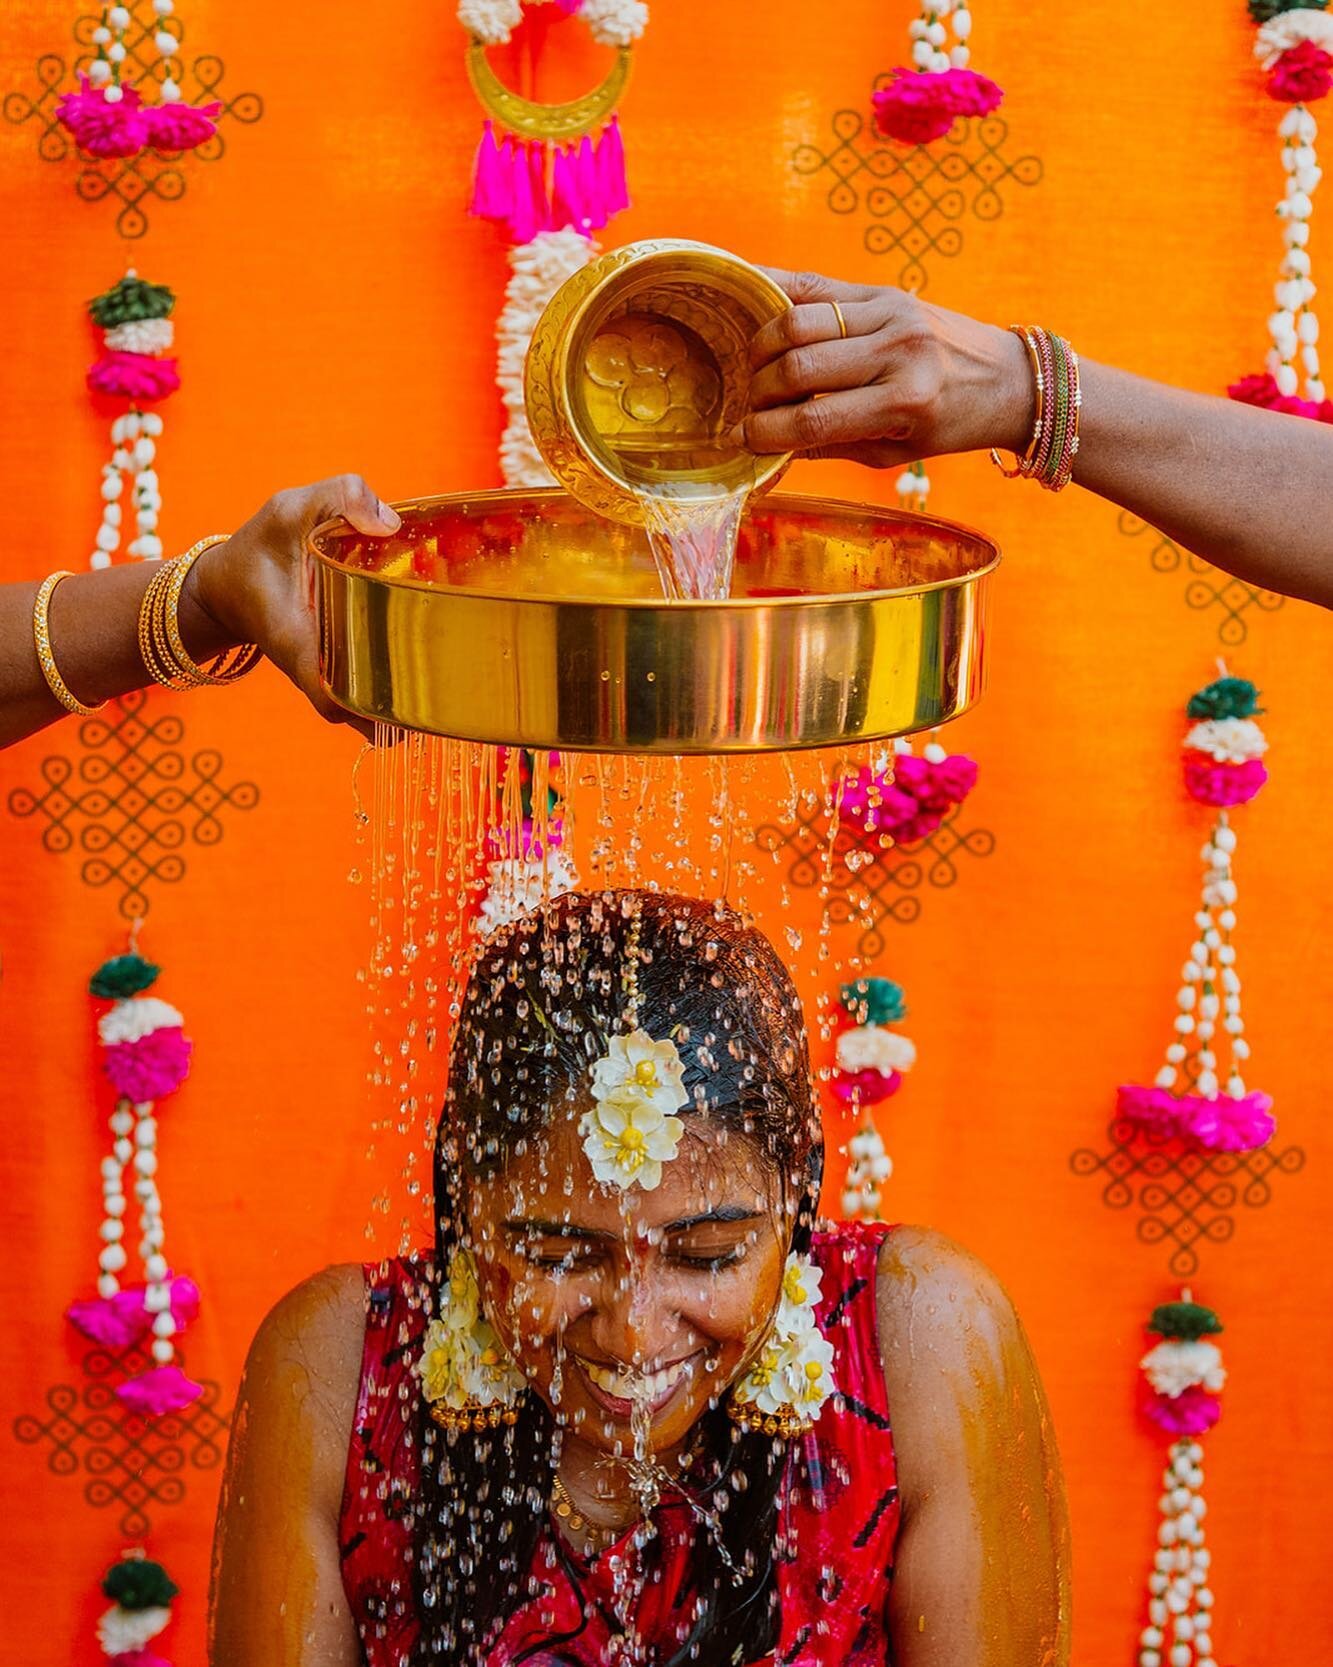 updating the website and re-discovering all kinds of gems from last year. this one is from a haldi ceremony this august. ✨